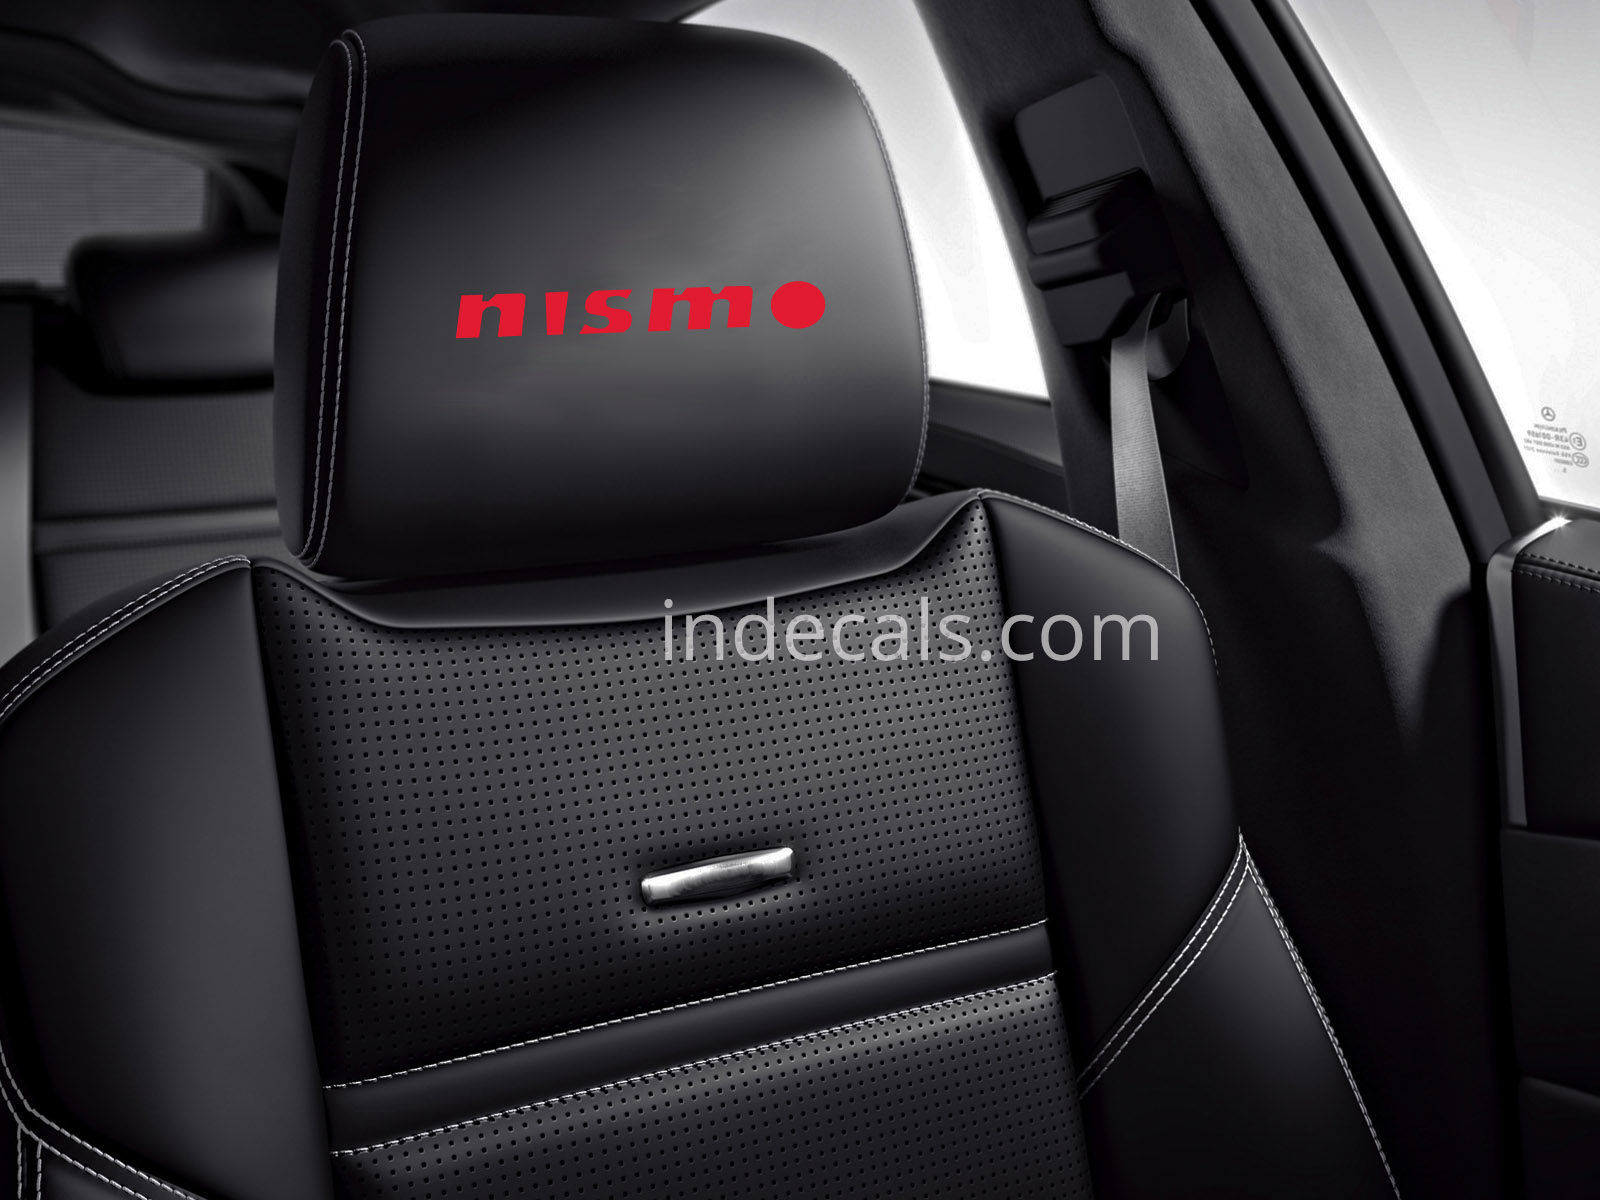 6 x Nismo Stickers for Headrests - Red